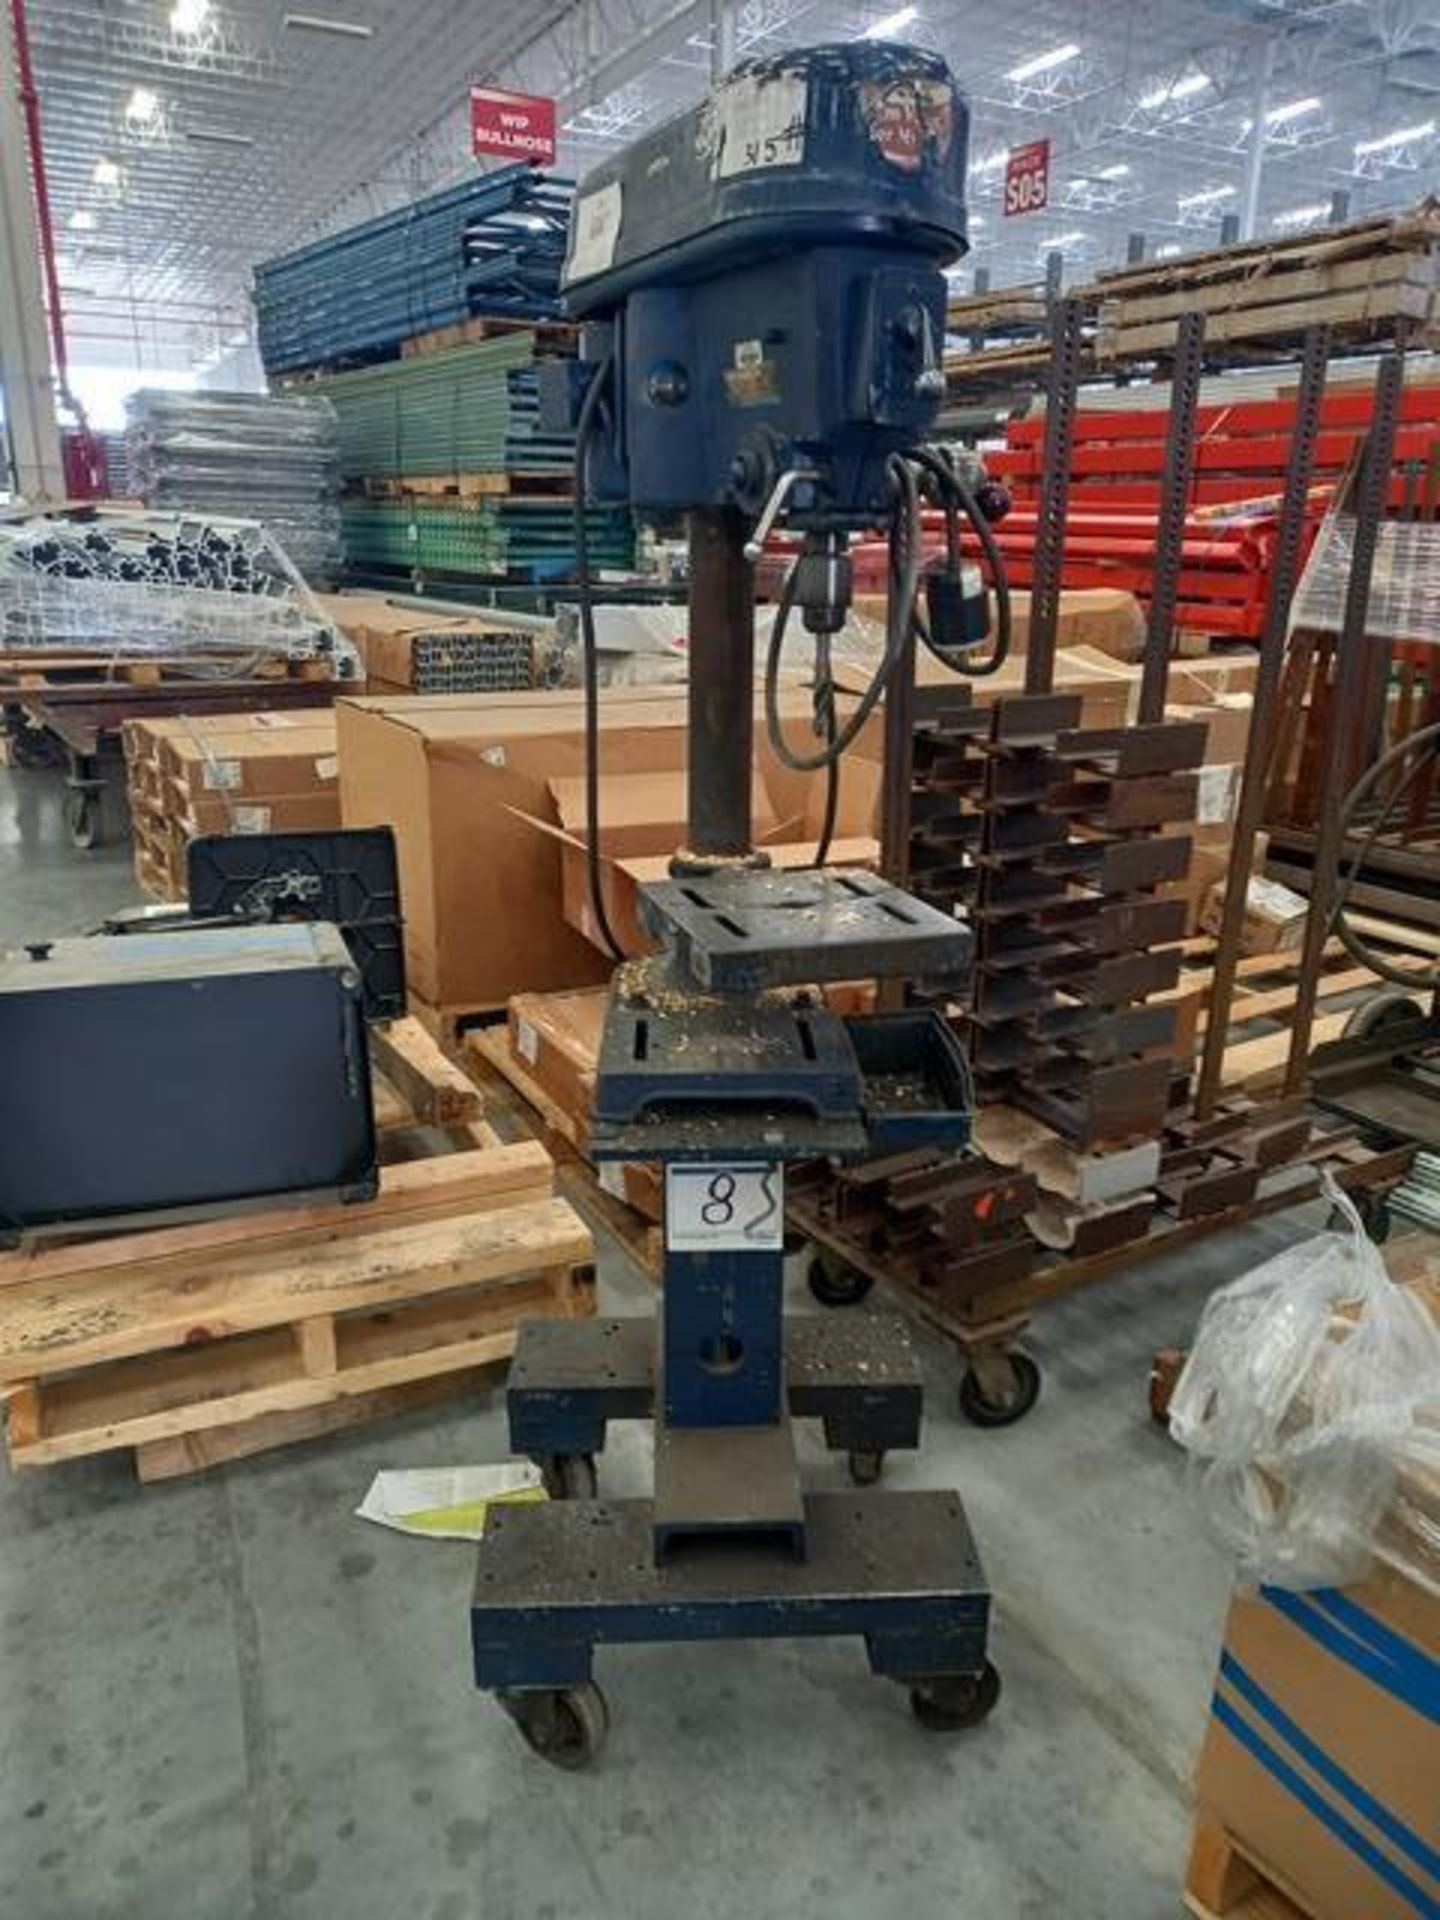 Rockwell 65-000 Drill Press, S/N: 1311585, 1/2 HP, 5 Speeds, 4" Travel (Tag: Huf15365) (Location: